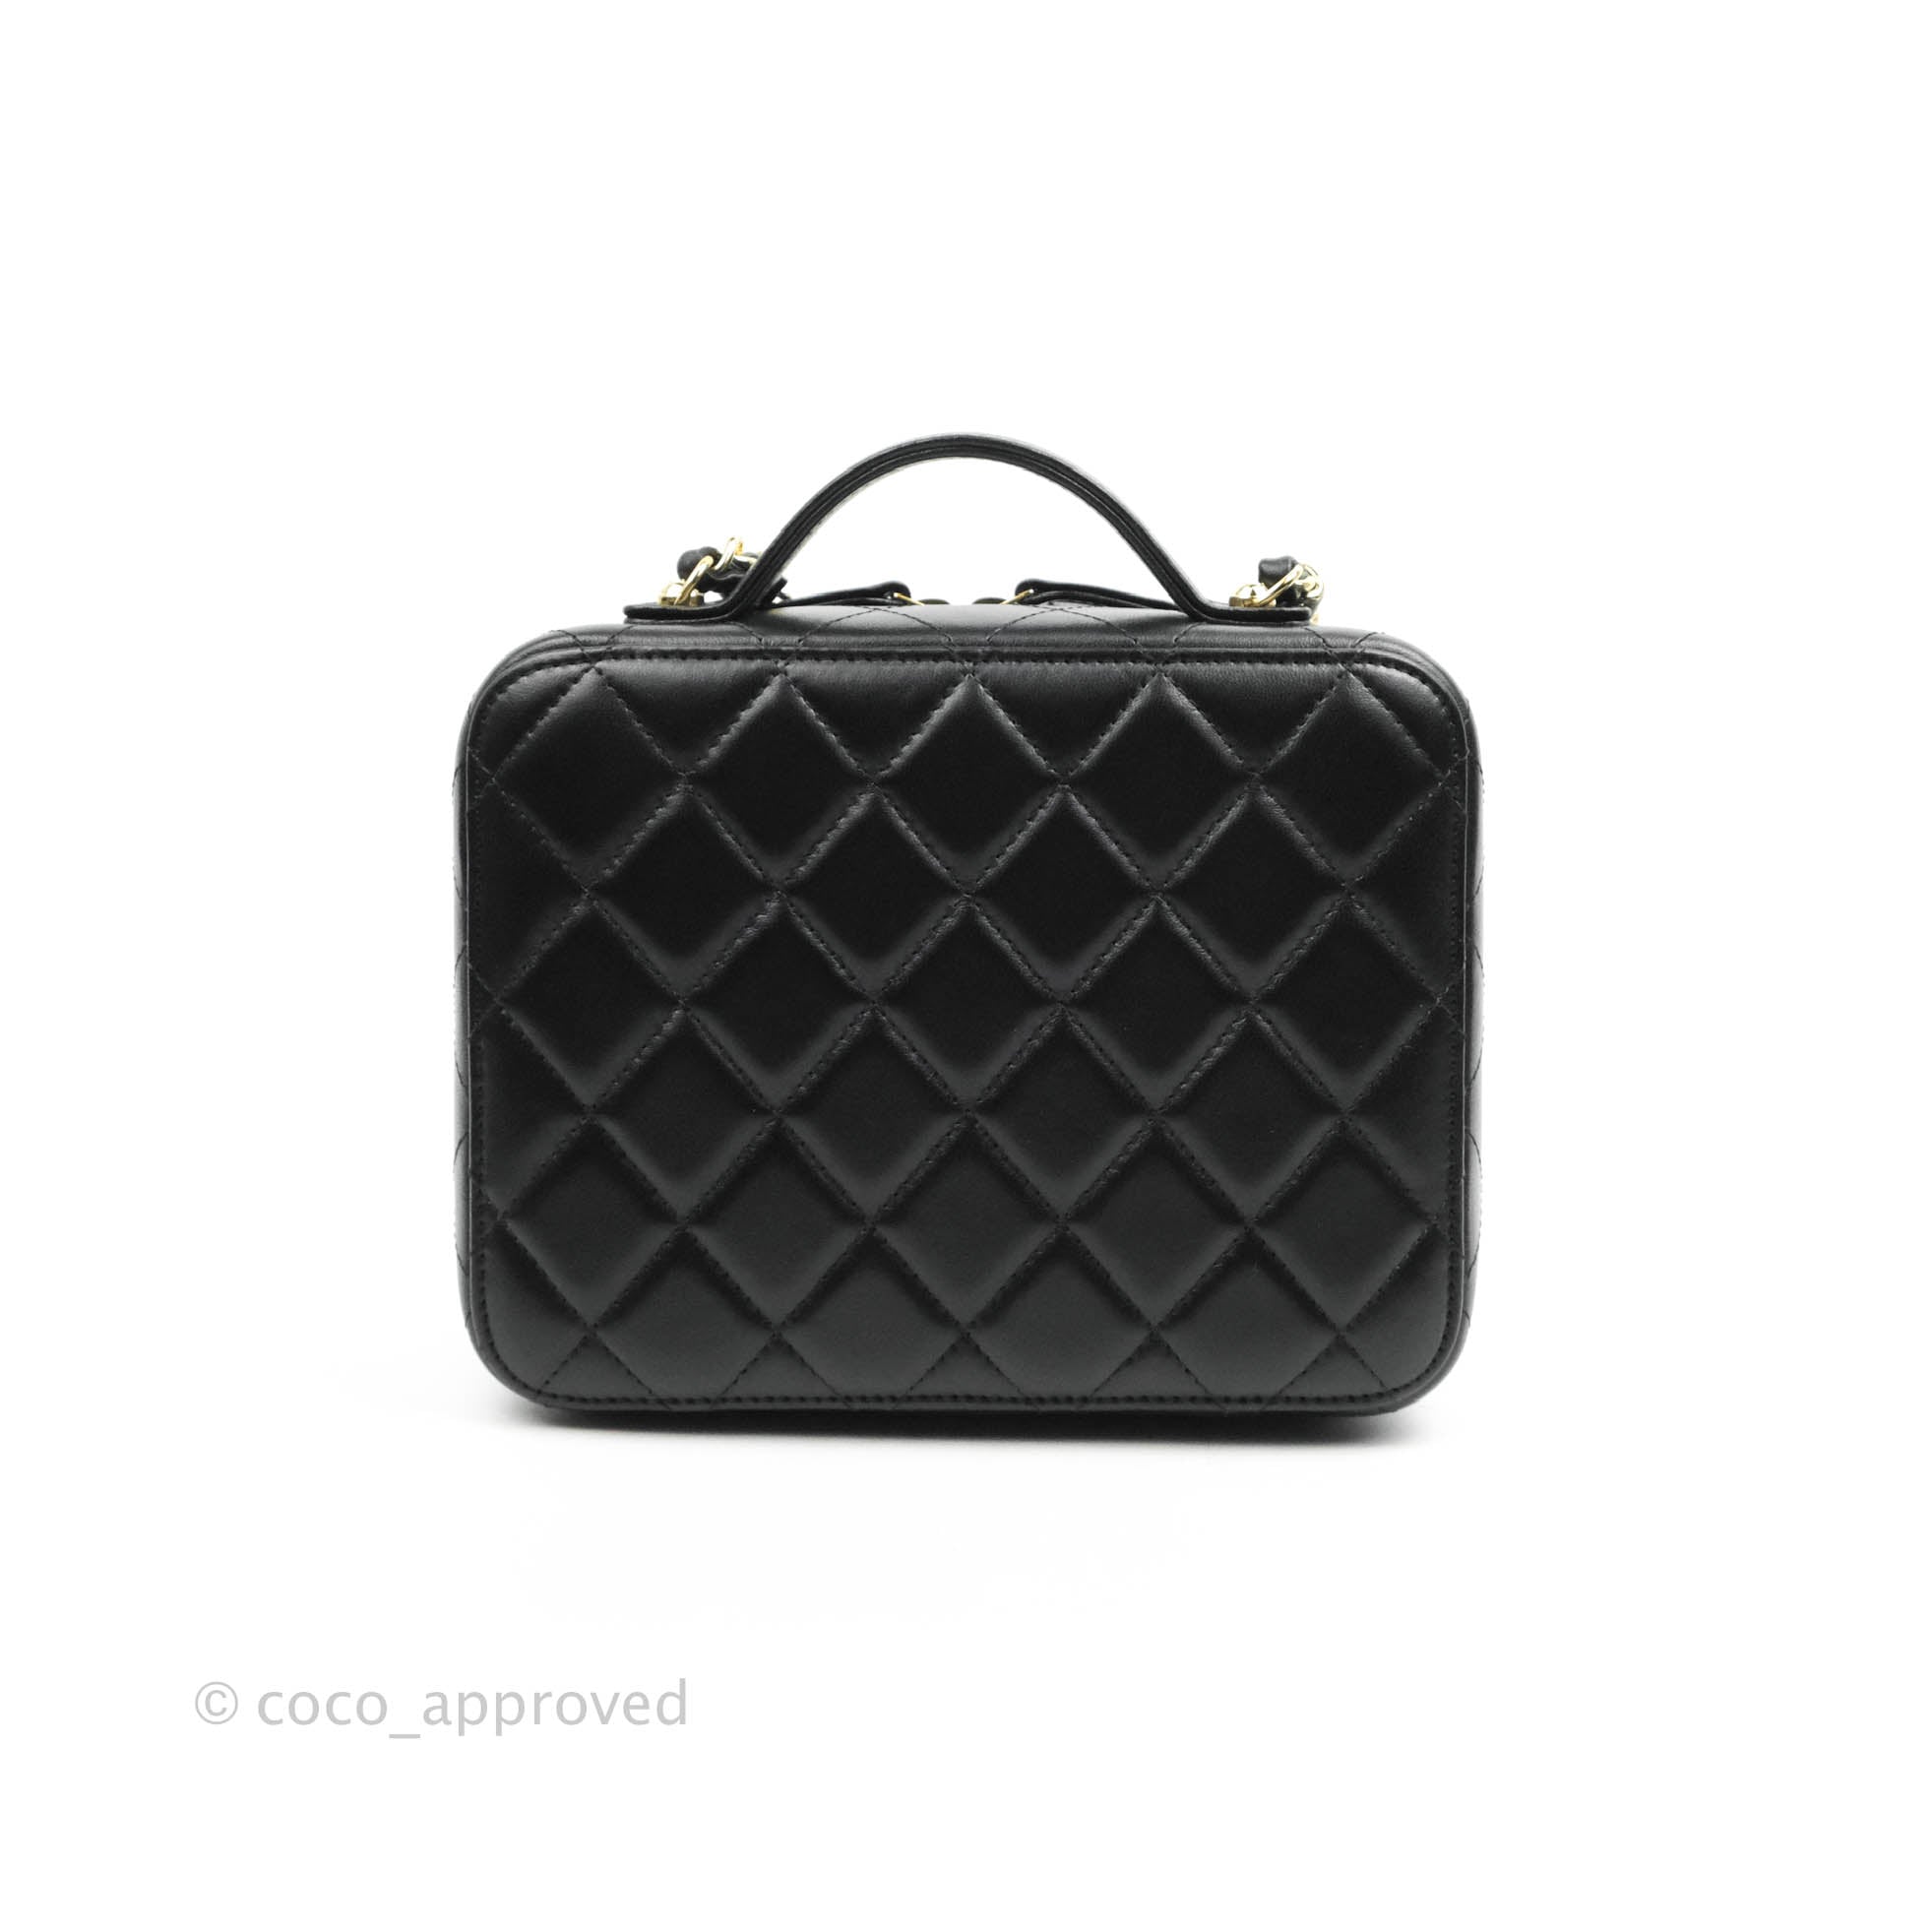 Chanel Quilted Golden Plate Vanity Case Black Lambskin Gold